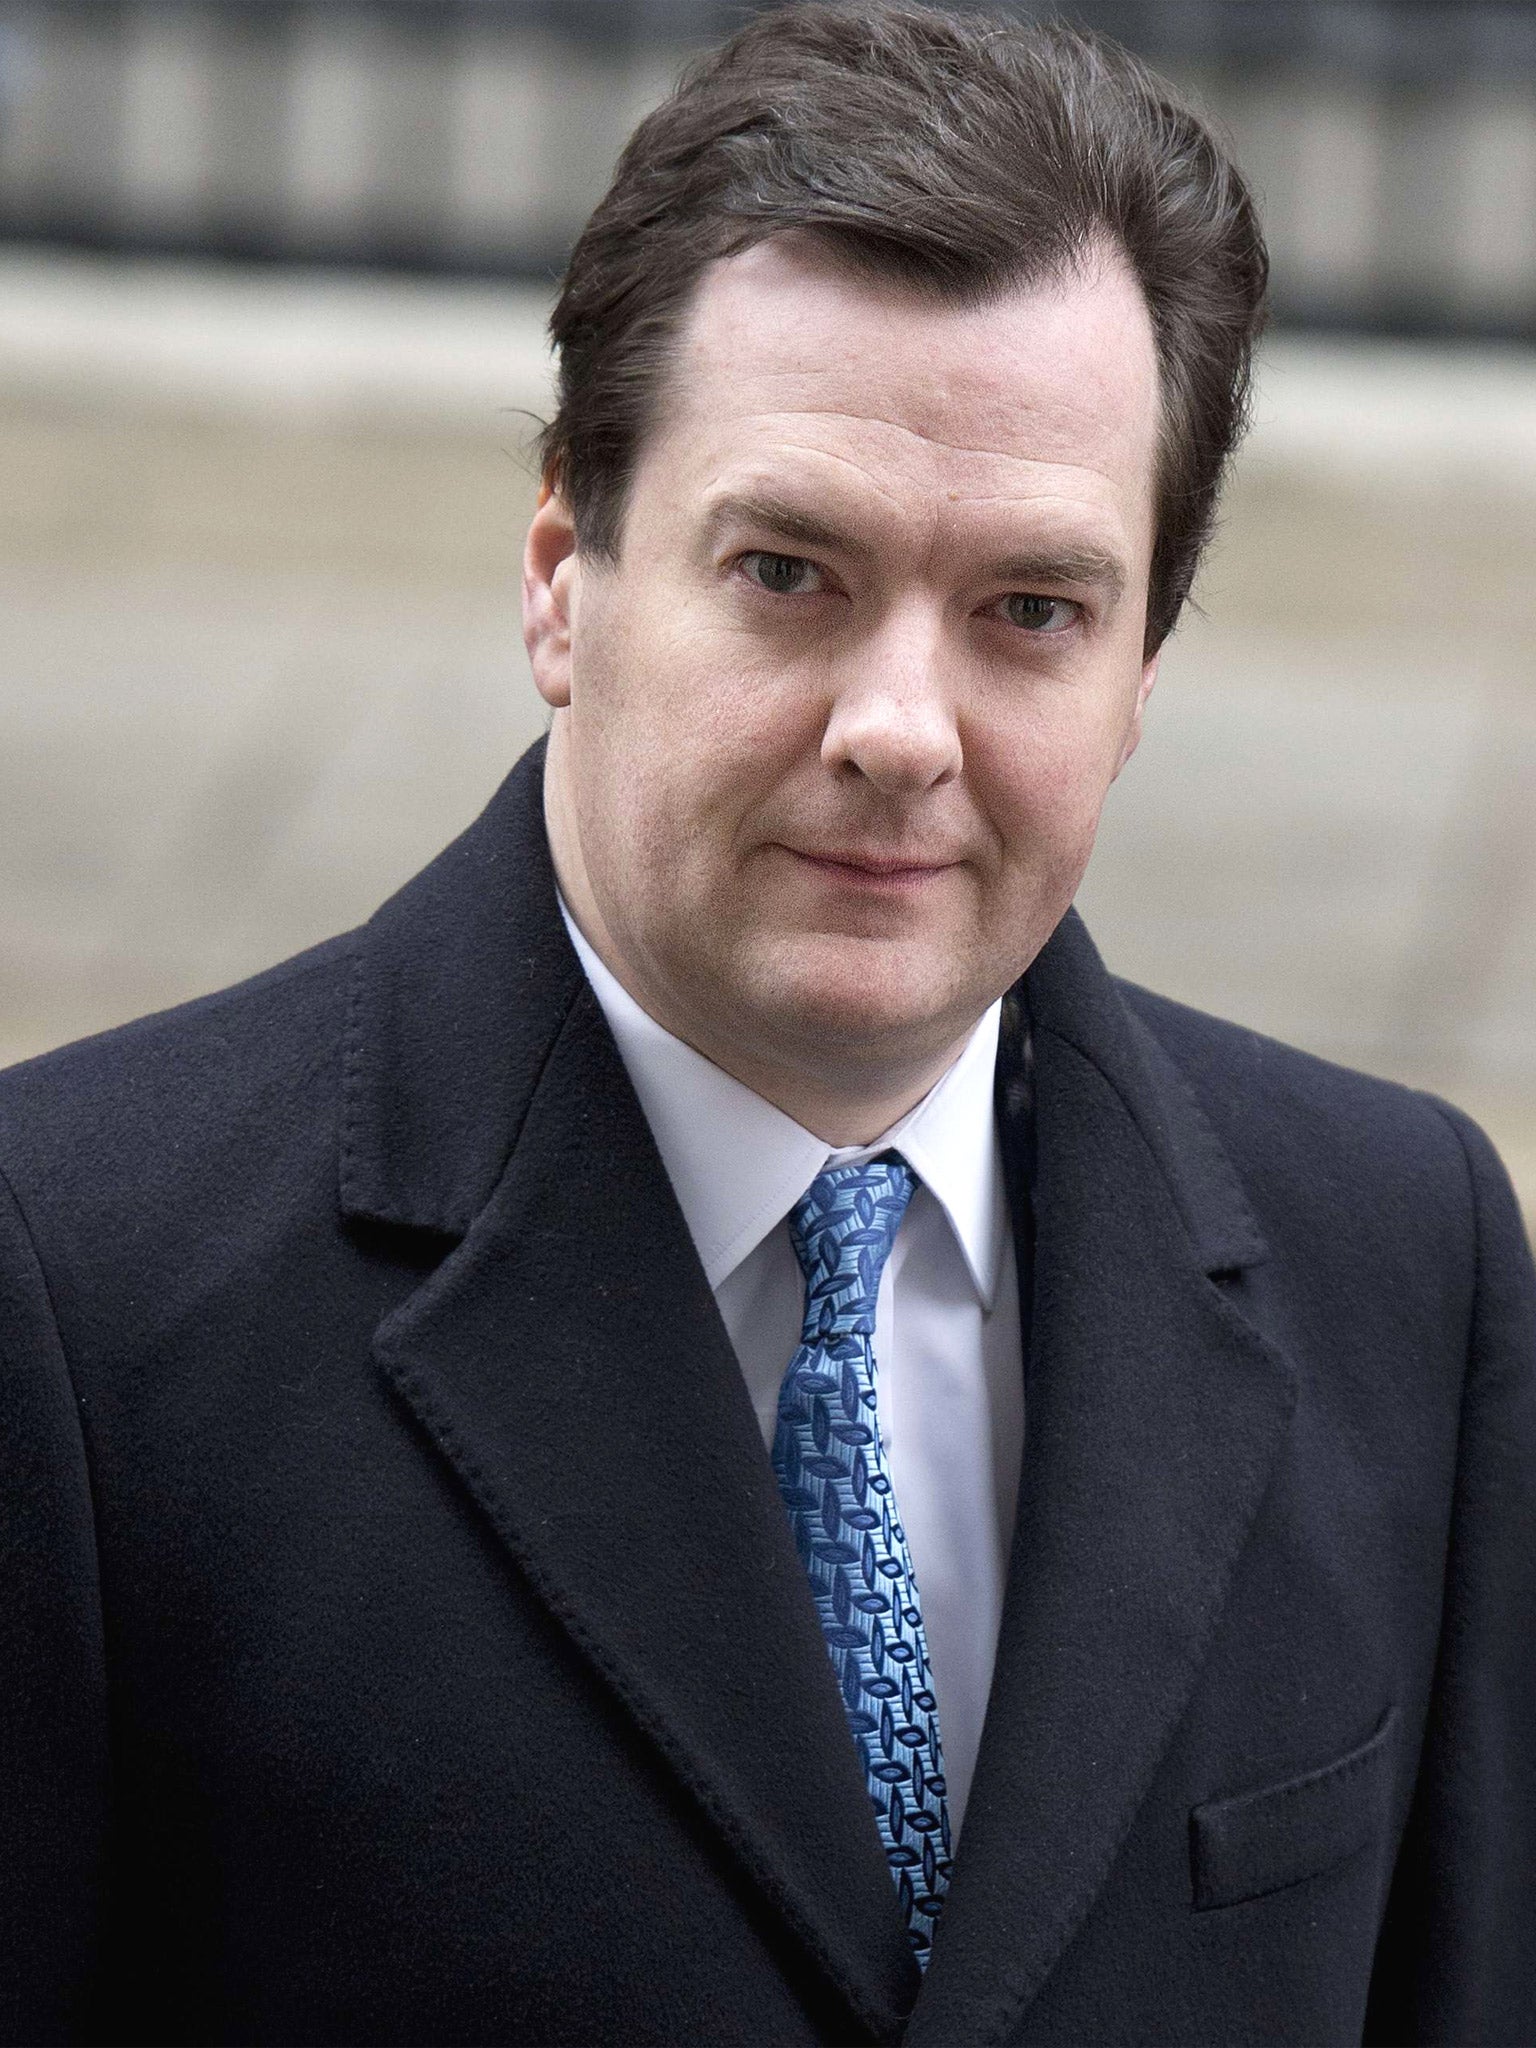 Osborne has placed great emphasis on the IMF’s support for his fiscal consolidation plans